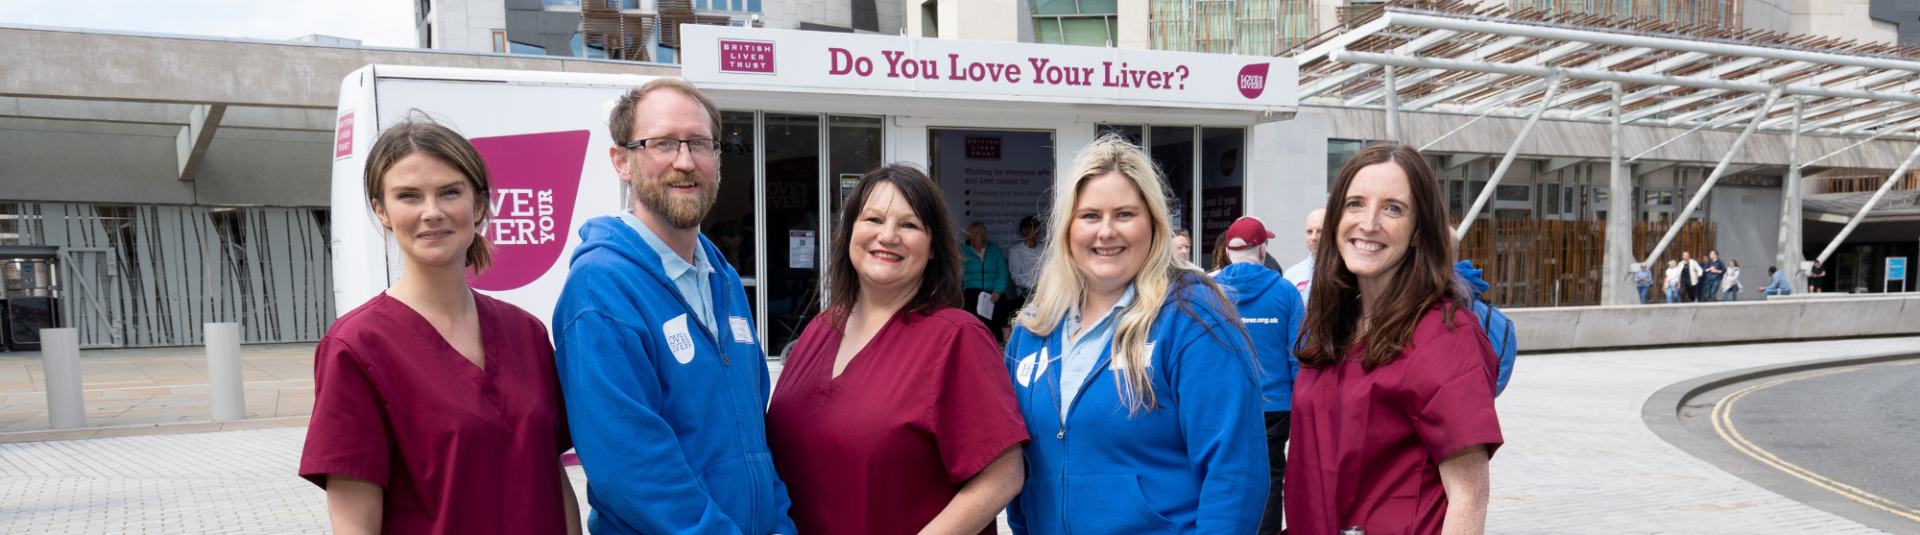 British Liver Trust Nurses and Outreach staff, dressed in red scrubs and blue hoodies, standing in front of the mobile Love Your Liver unit